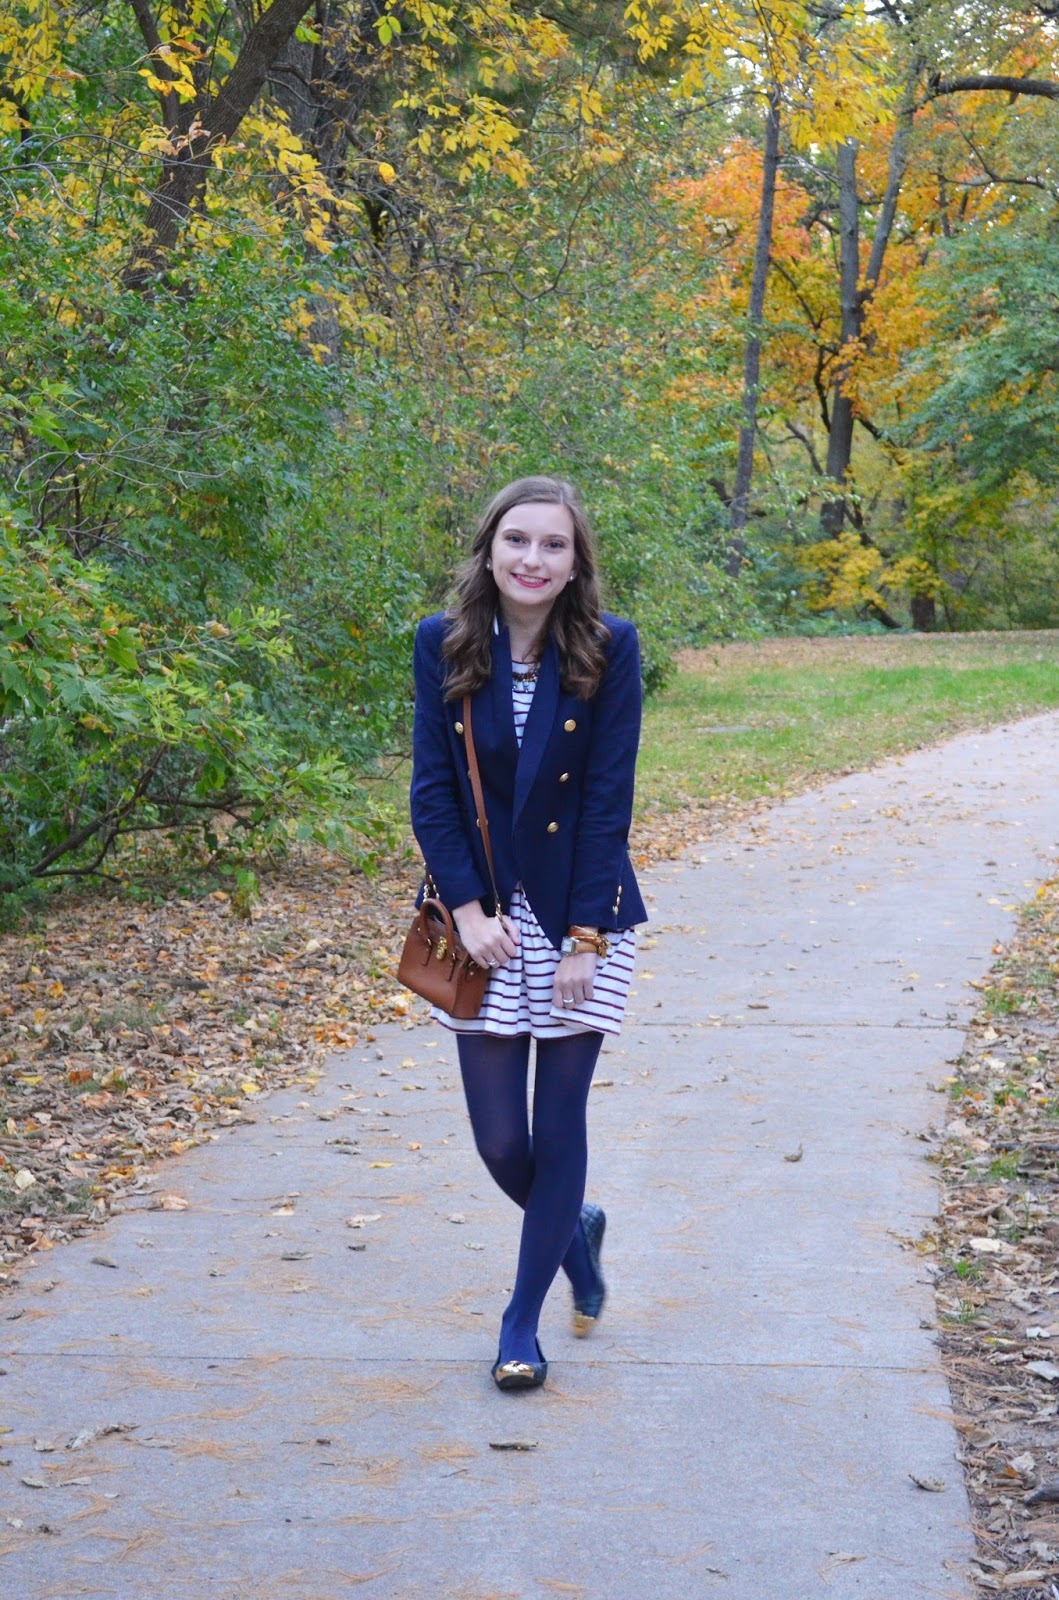 Sew Cute: OOTD: The Ivy League